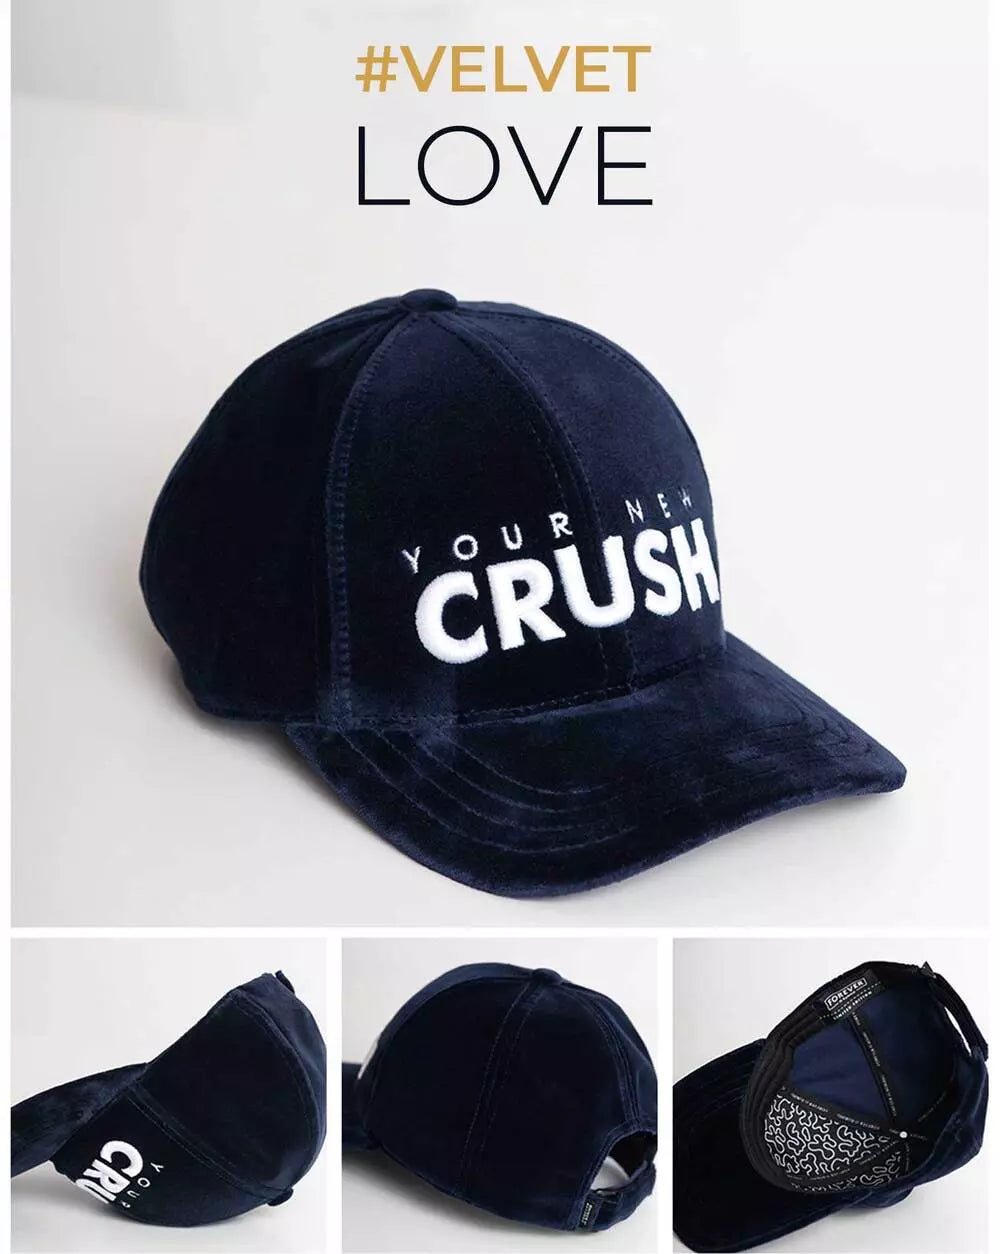 Forever is Boring Crush Blue Velvet Cap with "YOUR NEW CRUSH" embroidery in white on the front